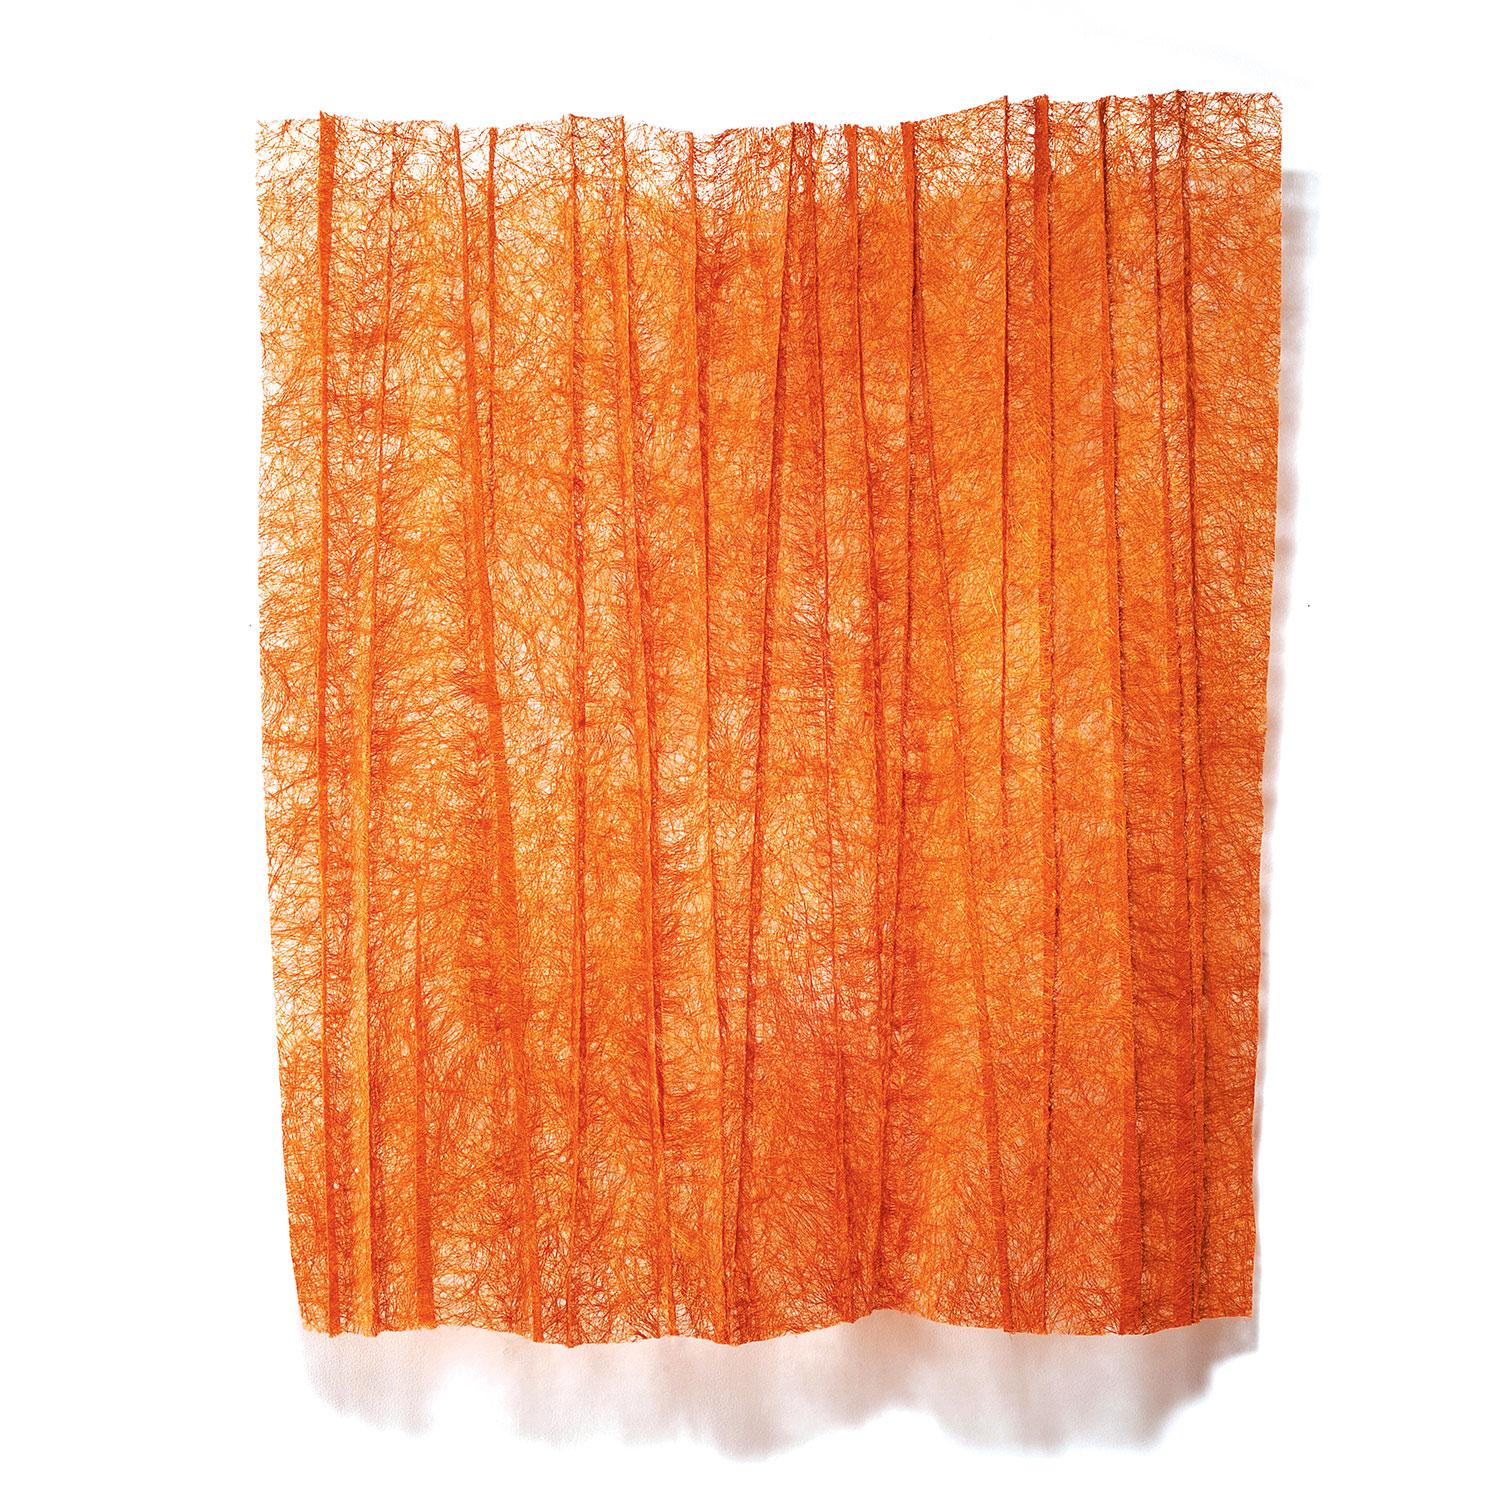 Orange Pleats is made of sisal fibers, dyed and formed in a technique unique to Mia Olsson. The sisal fibers used by the Swedish artist are shiny and reflect the light, even more when formed in relief. The colors are richly saturated — engaging the